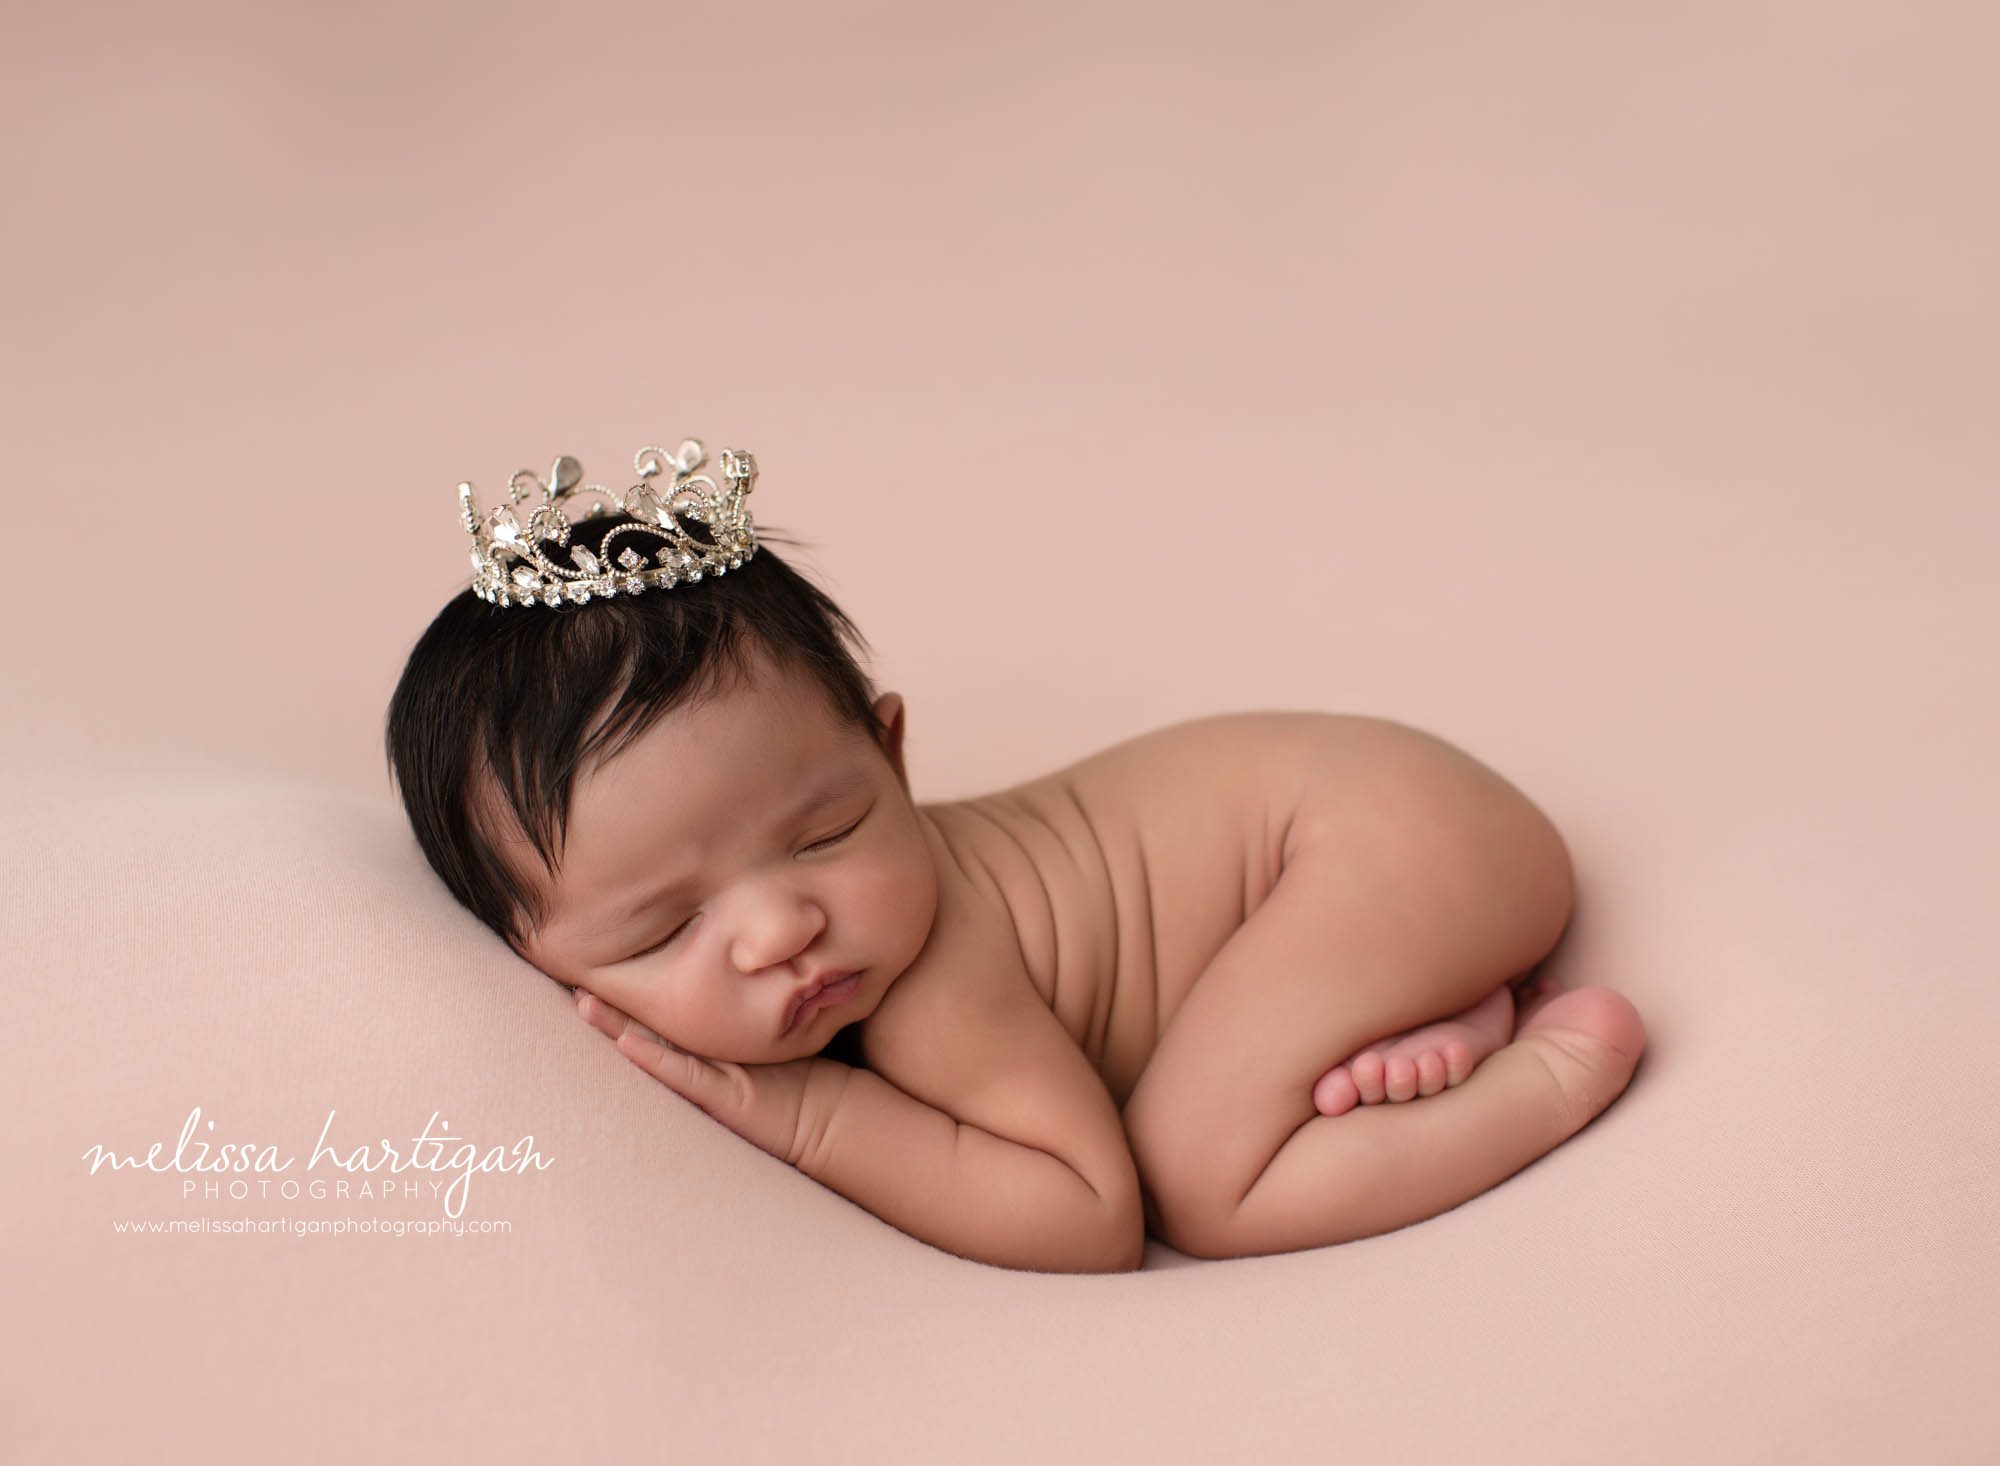 Baby girl posed in tushie up posed with jeweled newborn crown prop